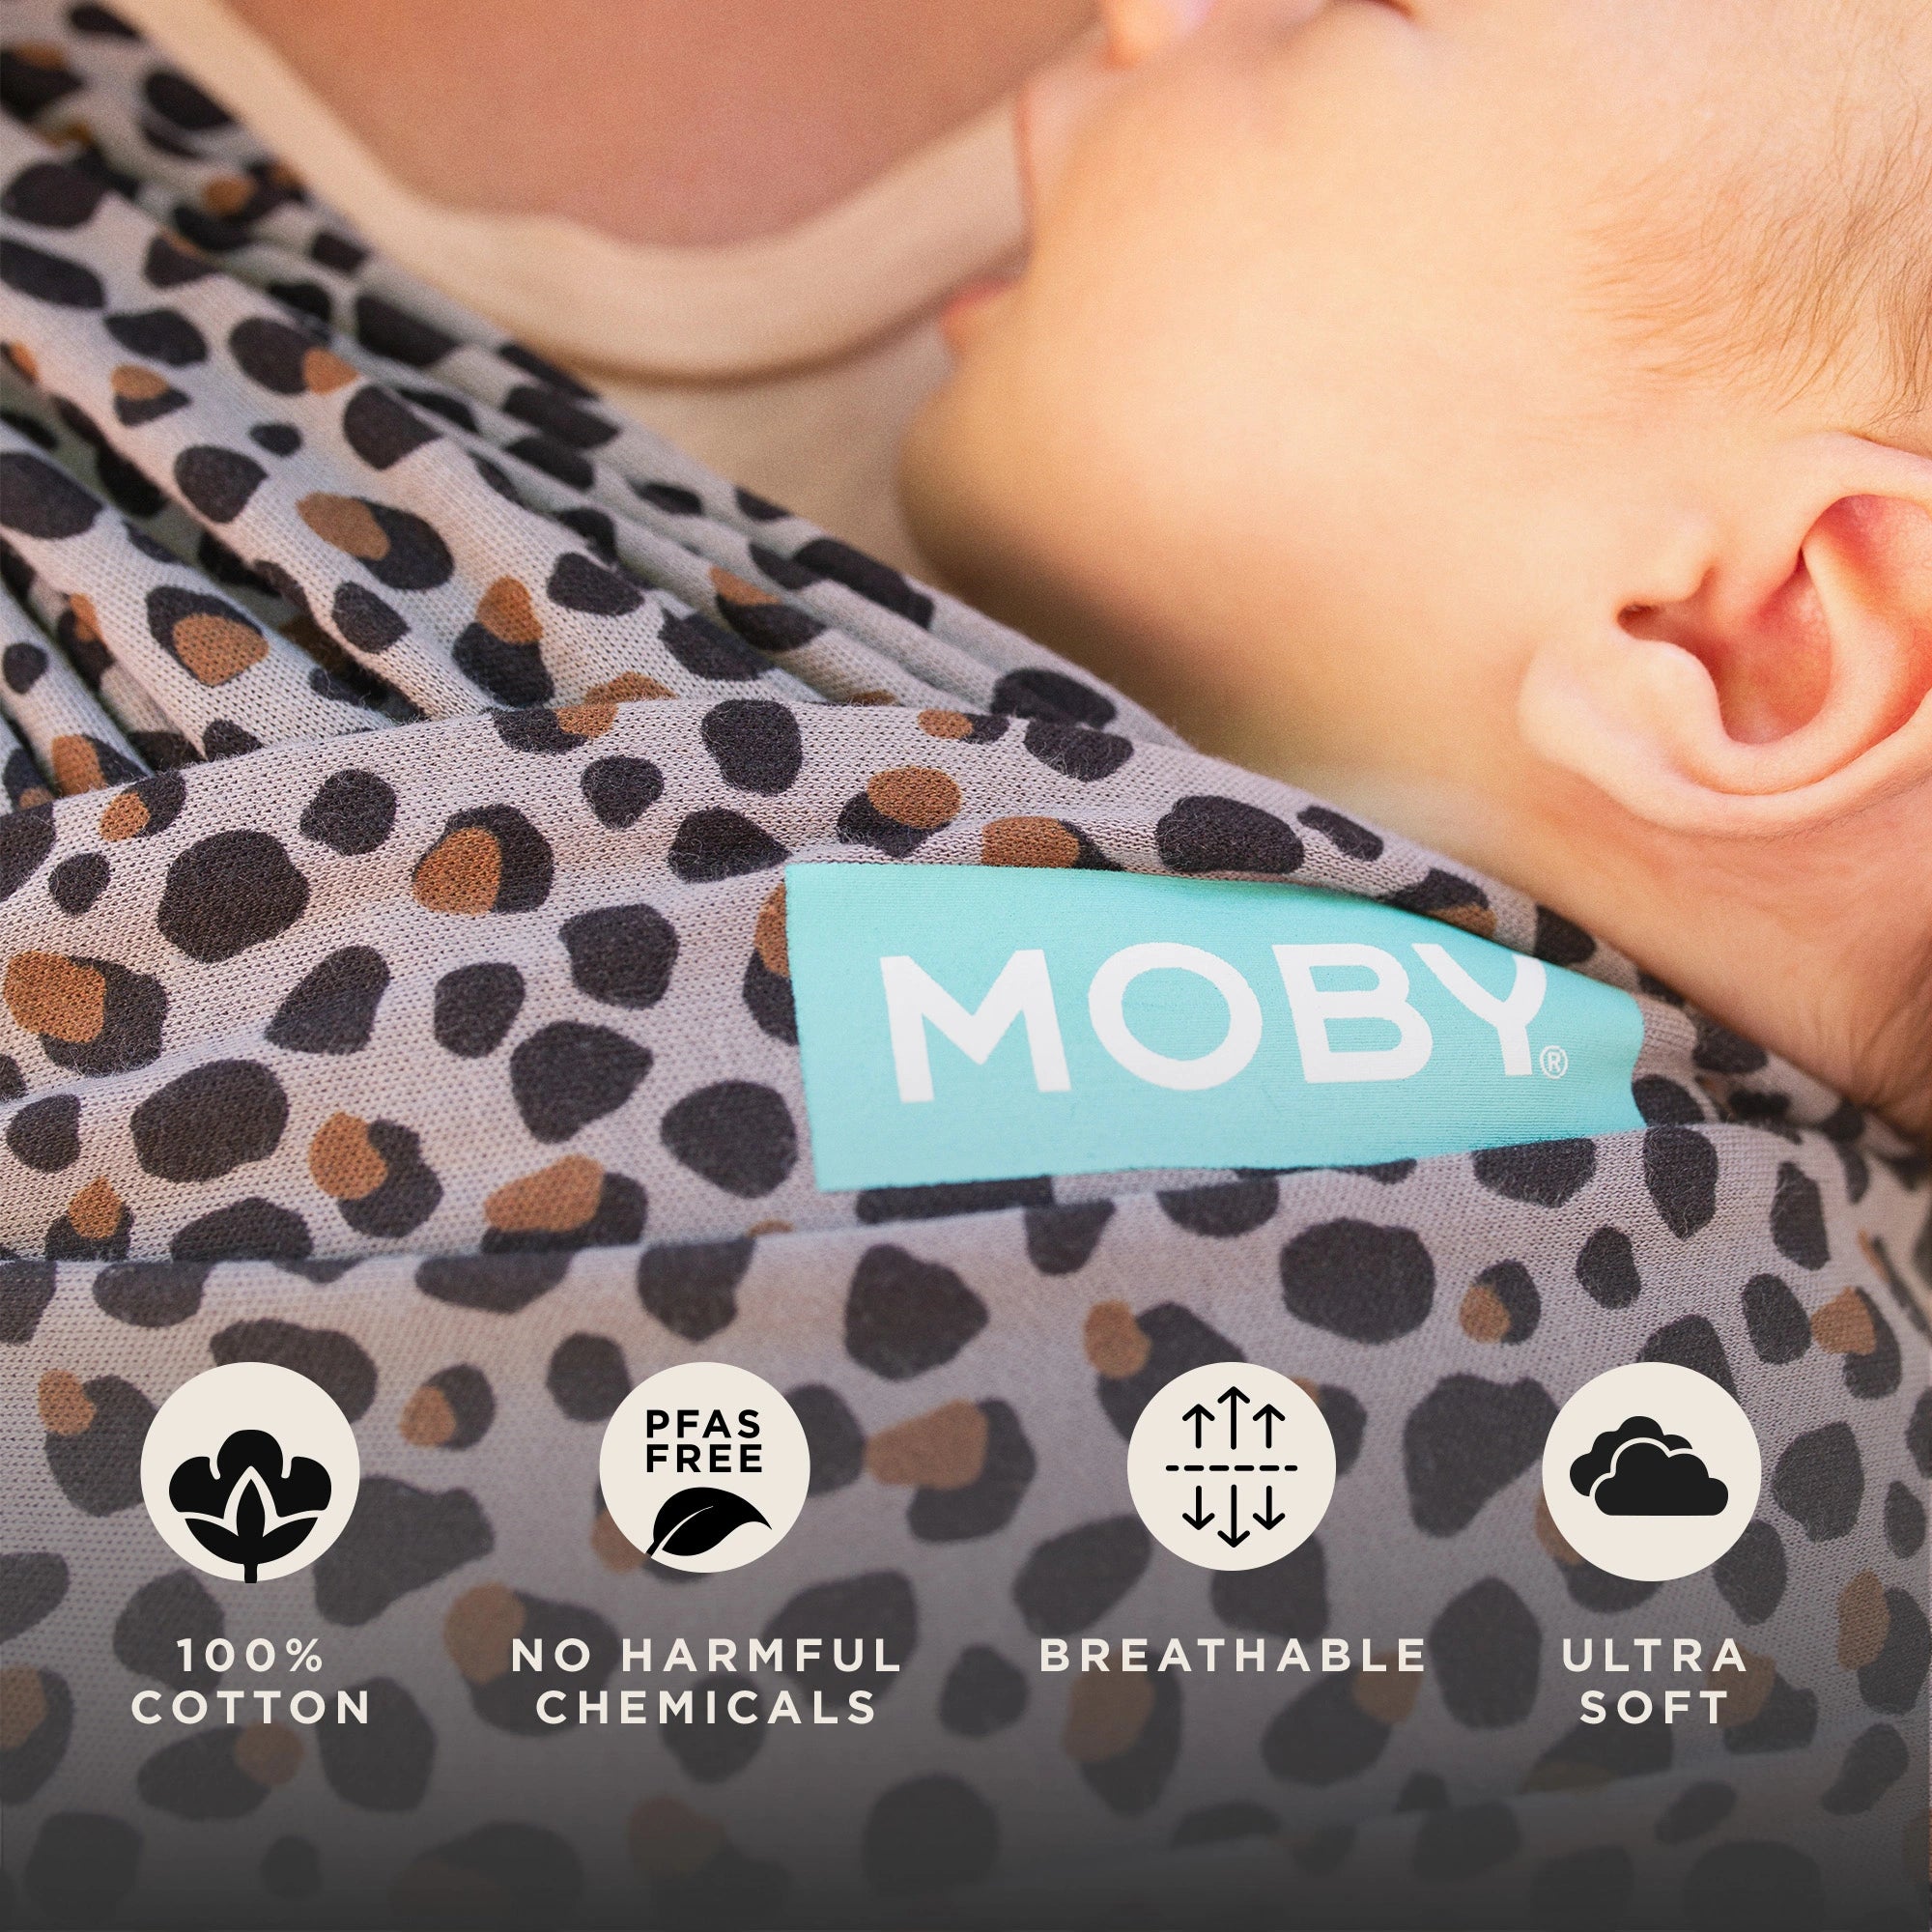 moby wrap features 100% cotton, no harmful chemicals, pfas free, breathable, ultra soft